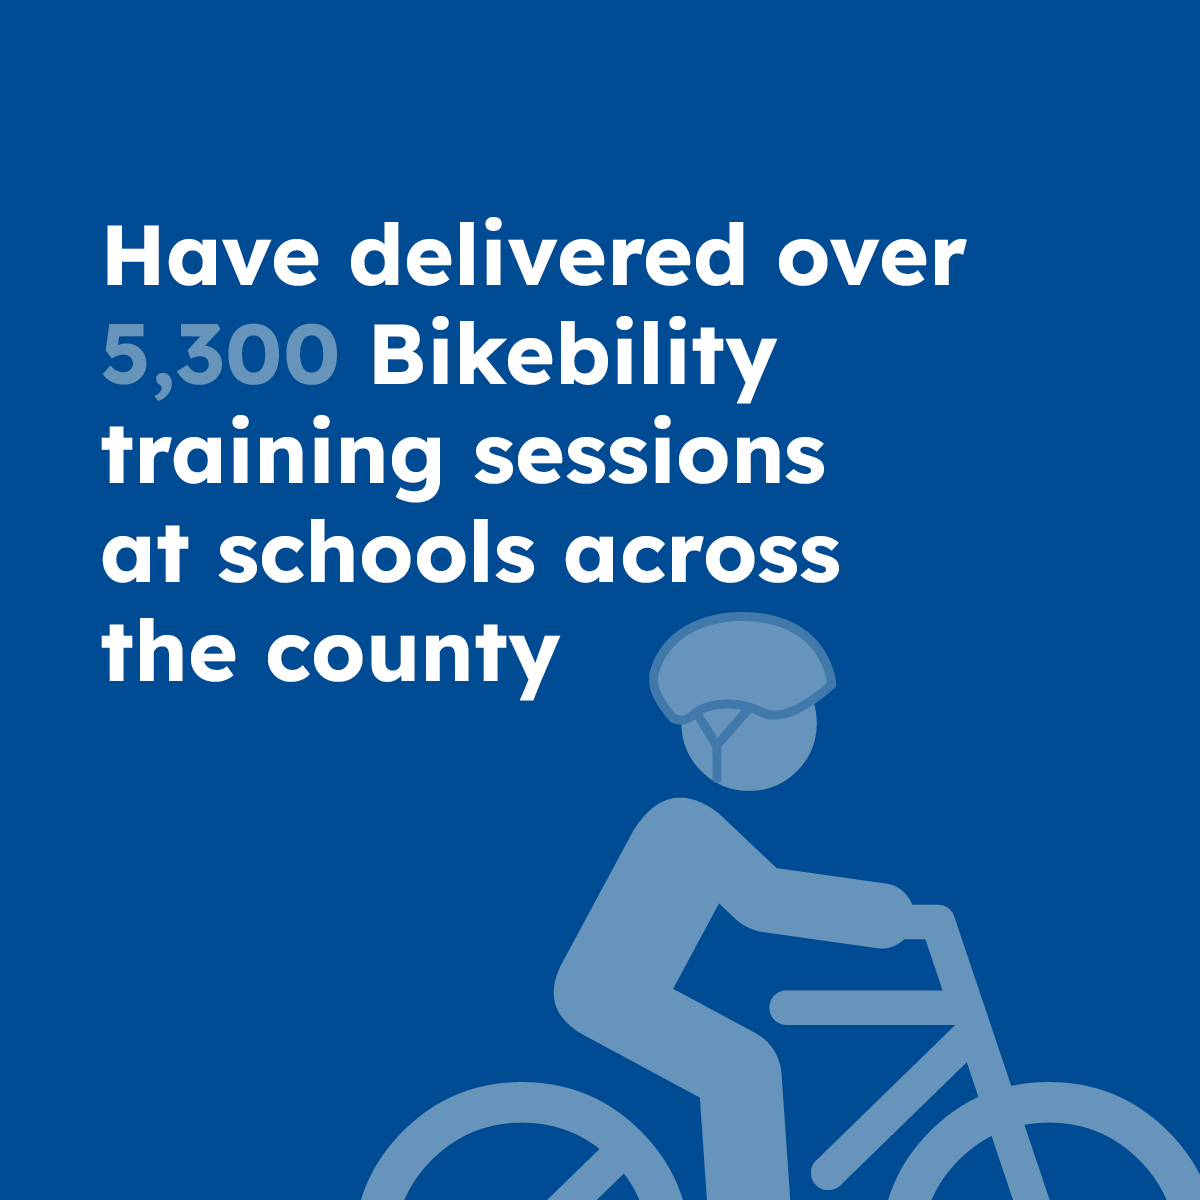 Have delivered over 5,300 Bikebility training sessions at schools across the county